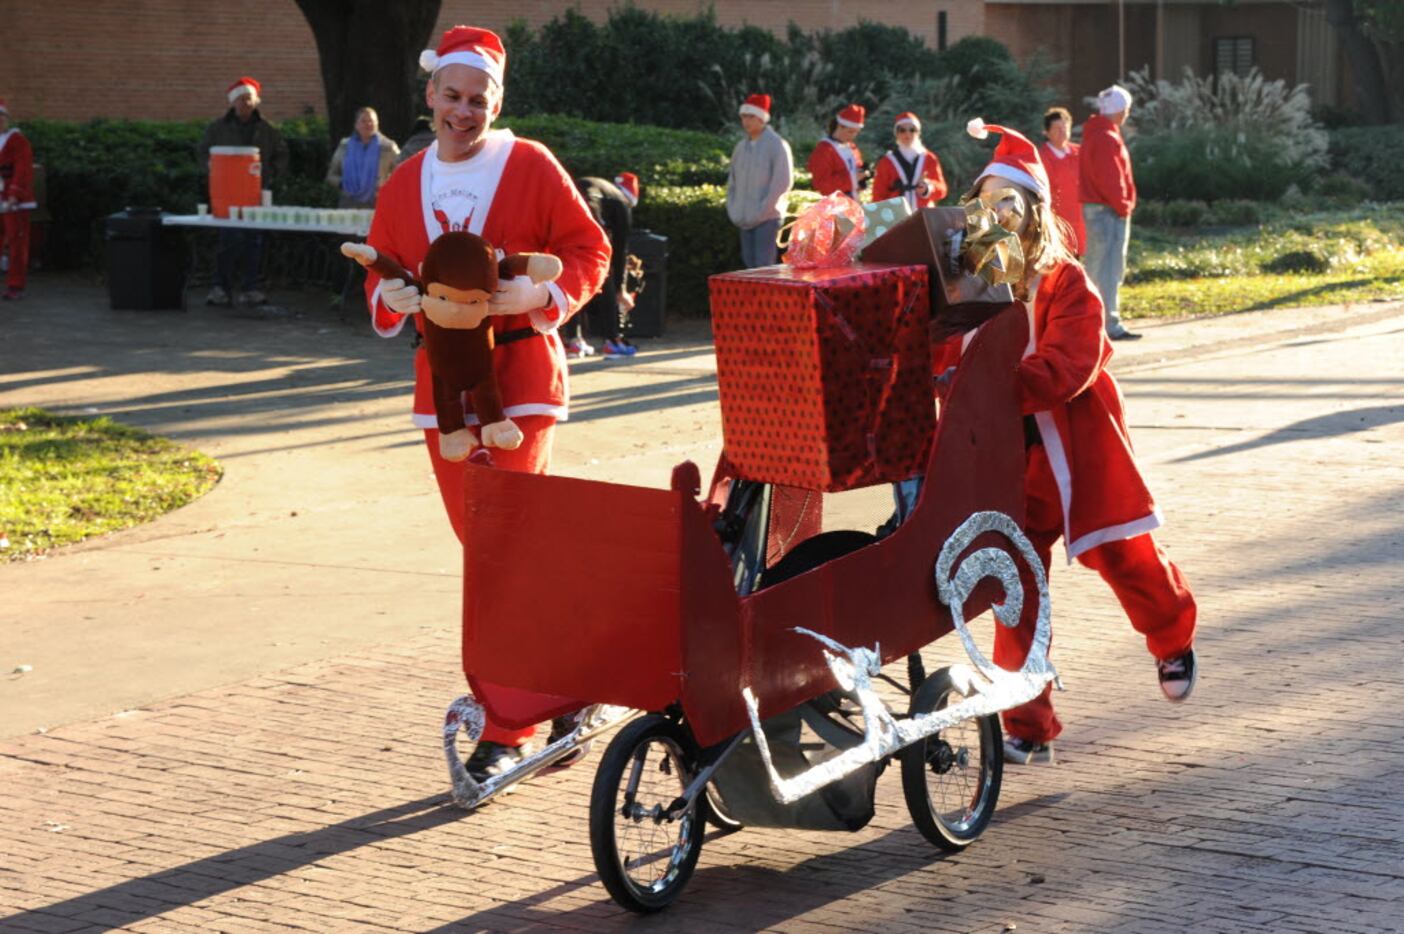 Santa races to the finish line with her sleigh at the Ho Ho Ho Run at Fair Park in Dallas,...